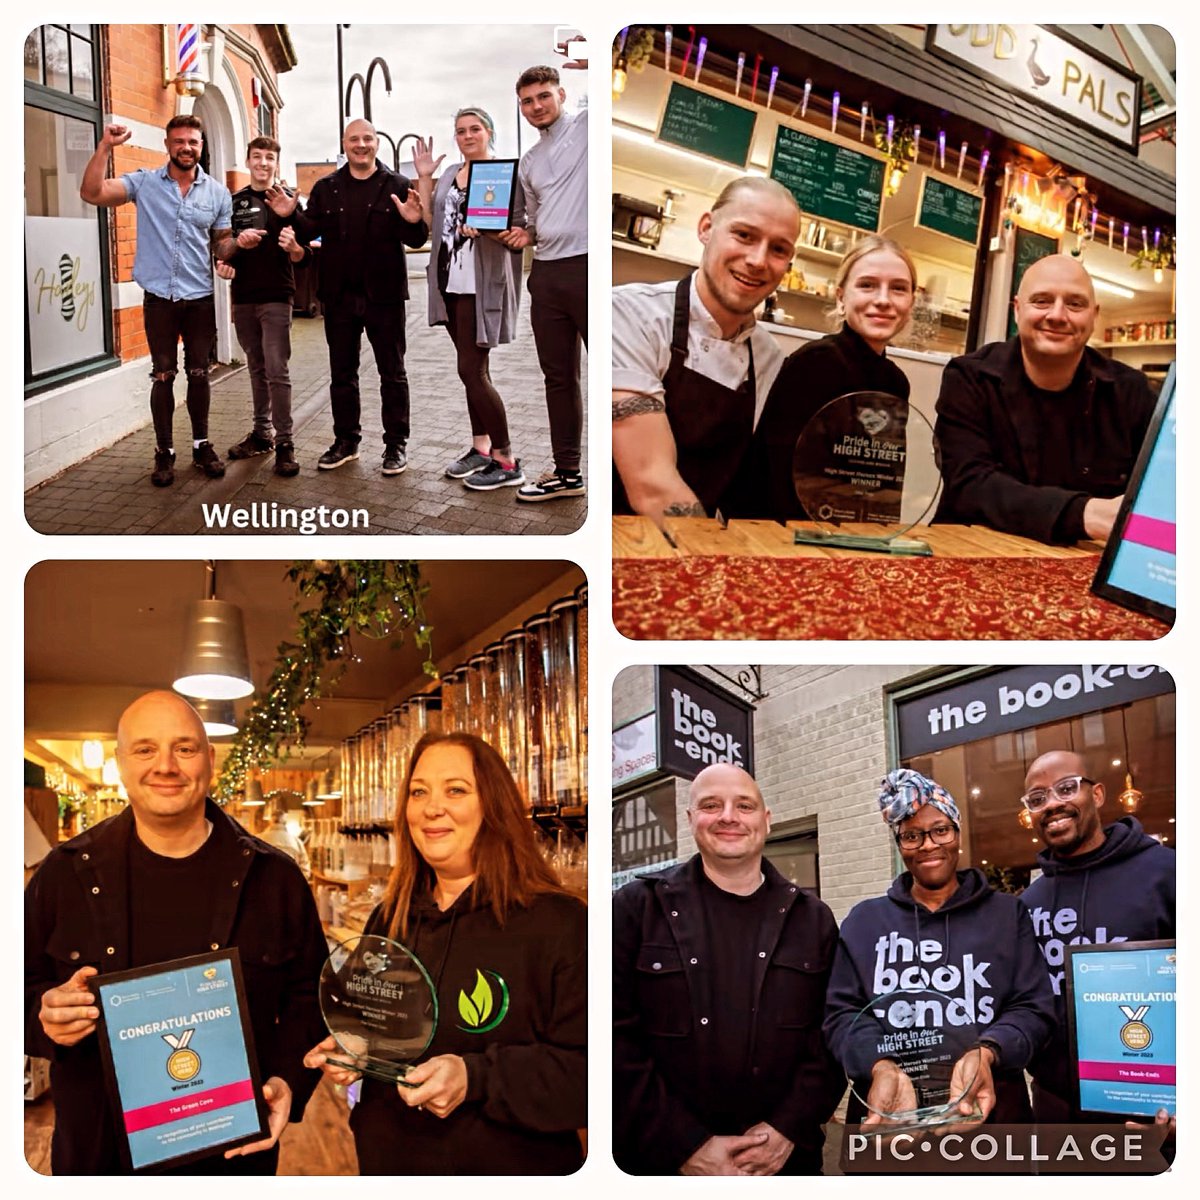 Well done to The Book Ends, Harley’s Barbers, The Green Cove and Odd Pals who’ve all been awarded Pride in Our High Street ‘High Street Hero’ awards! 📸 from Telford & Wrekin .
.
#GBHighSt #Telford #Wellington #lovewellington